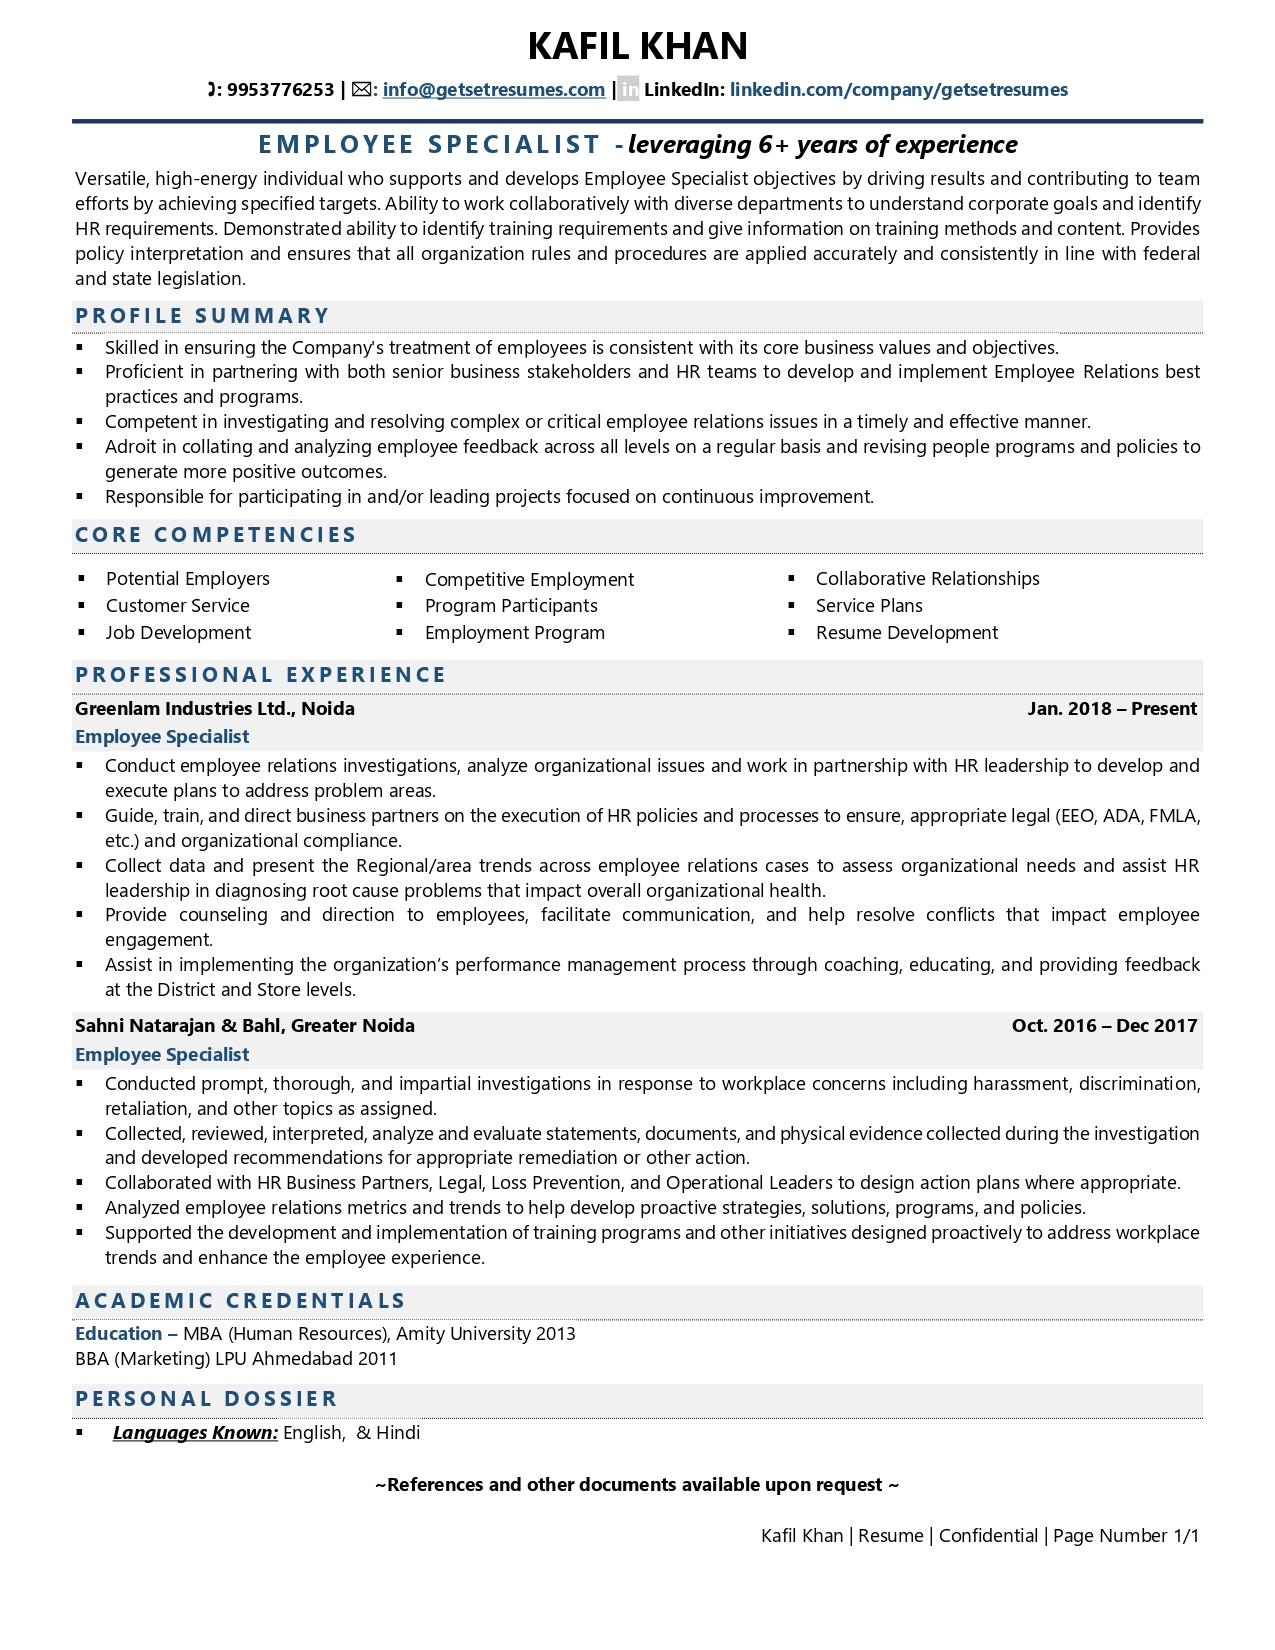 Employee Specialist - Resume Example & Template